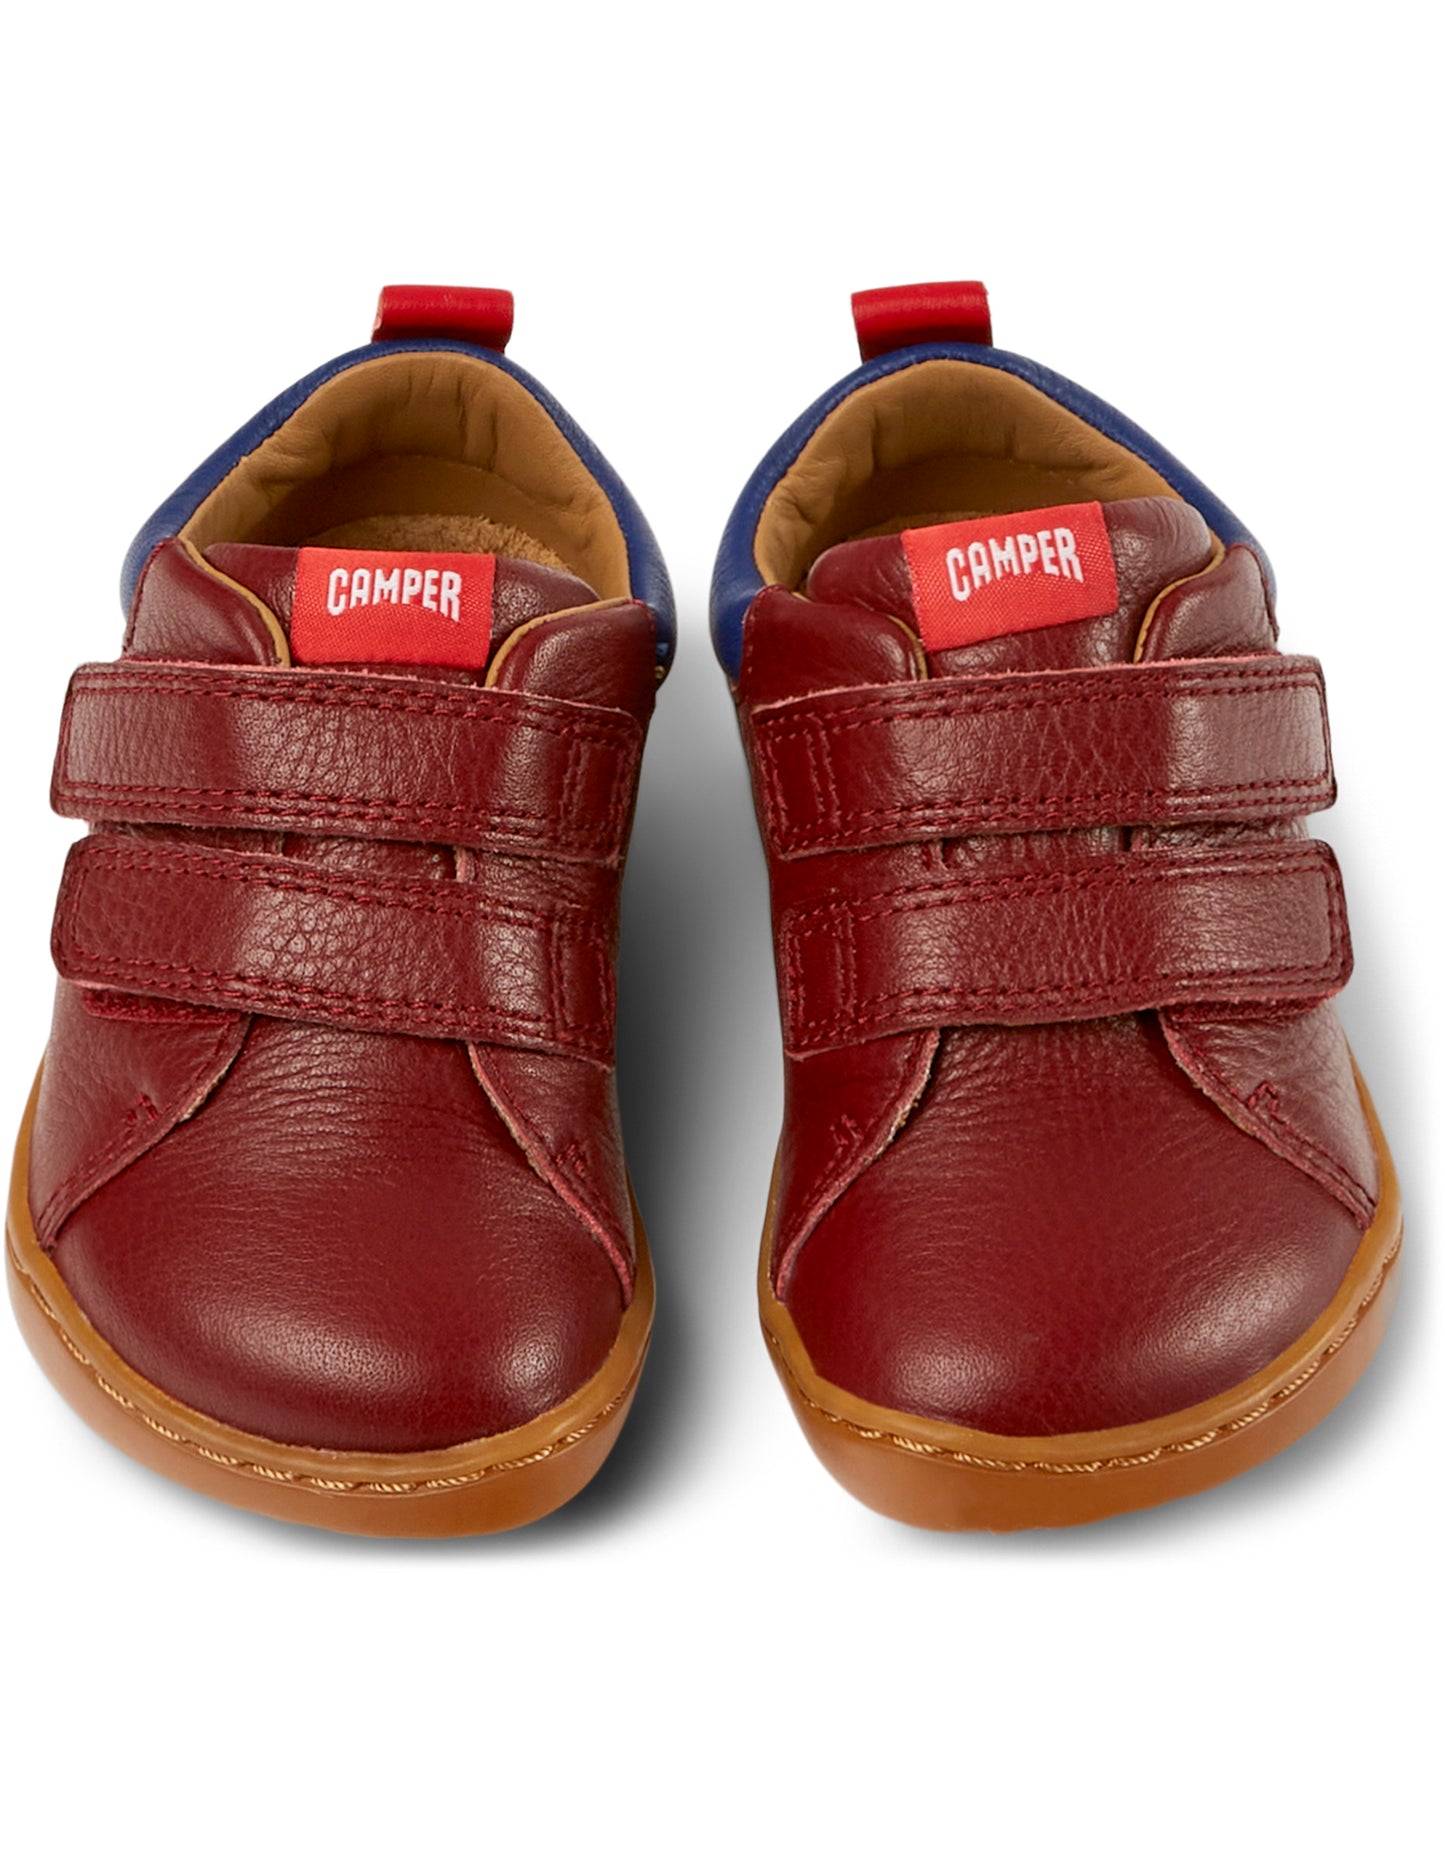 A boys casual shoe by Camper, style K800405-019, Peu Cami FW, in Burgundy Leather, with velcro fastening. Top pair view.